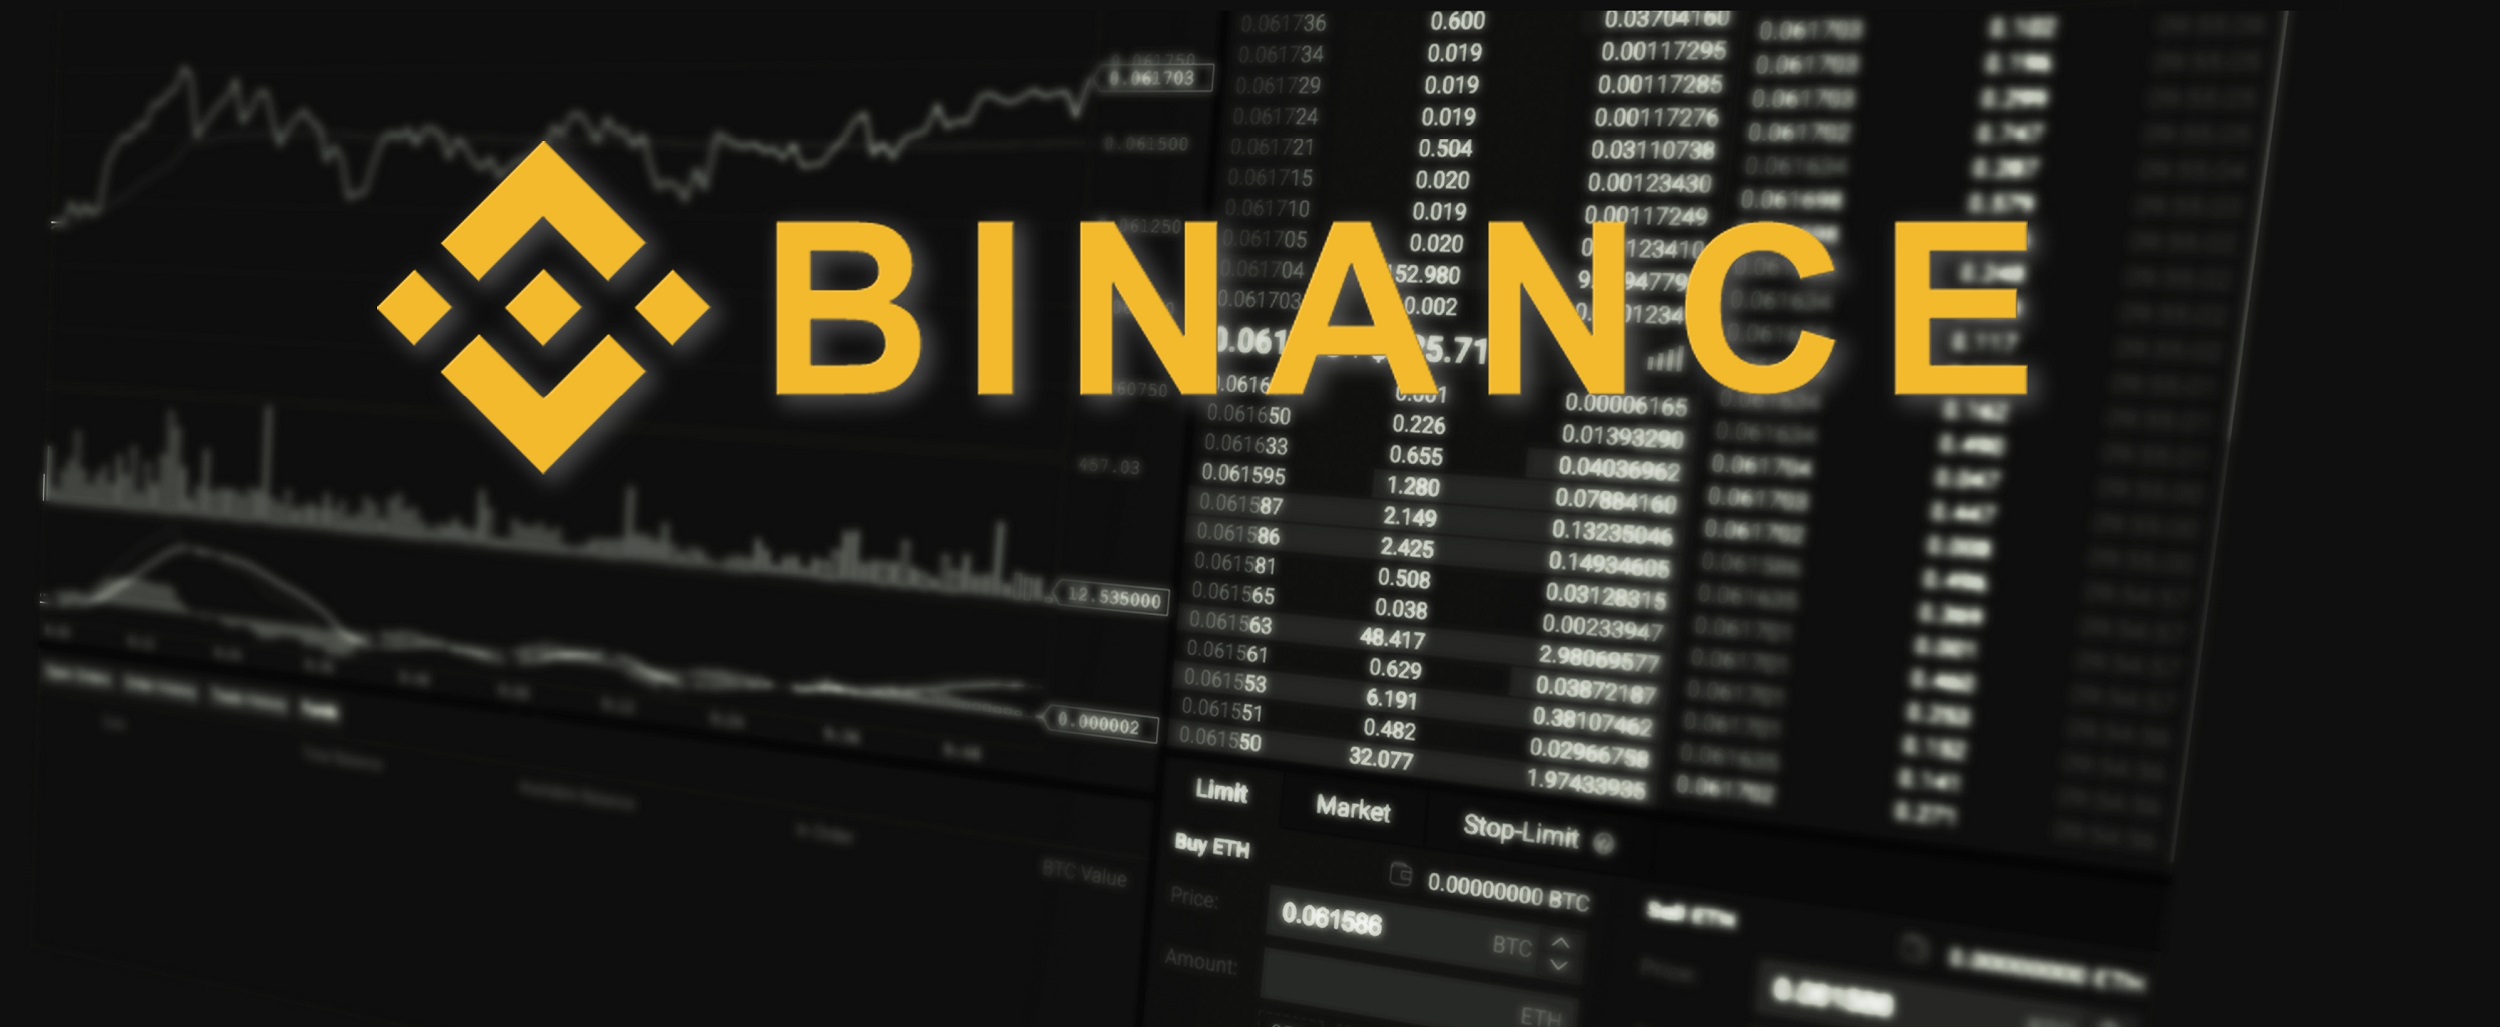  binance price say coin keeps following uptrend 